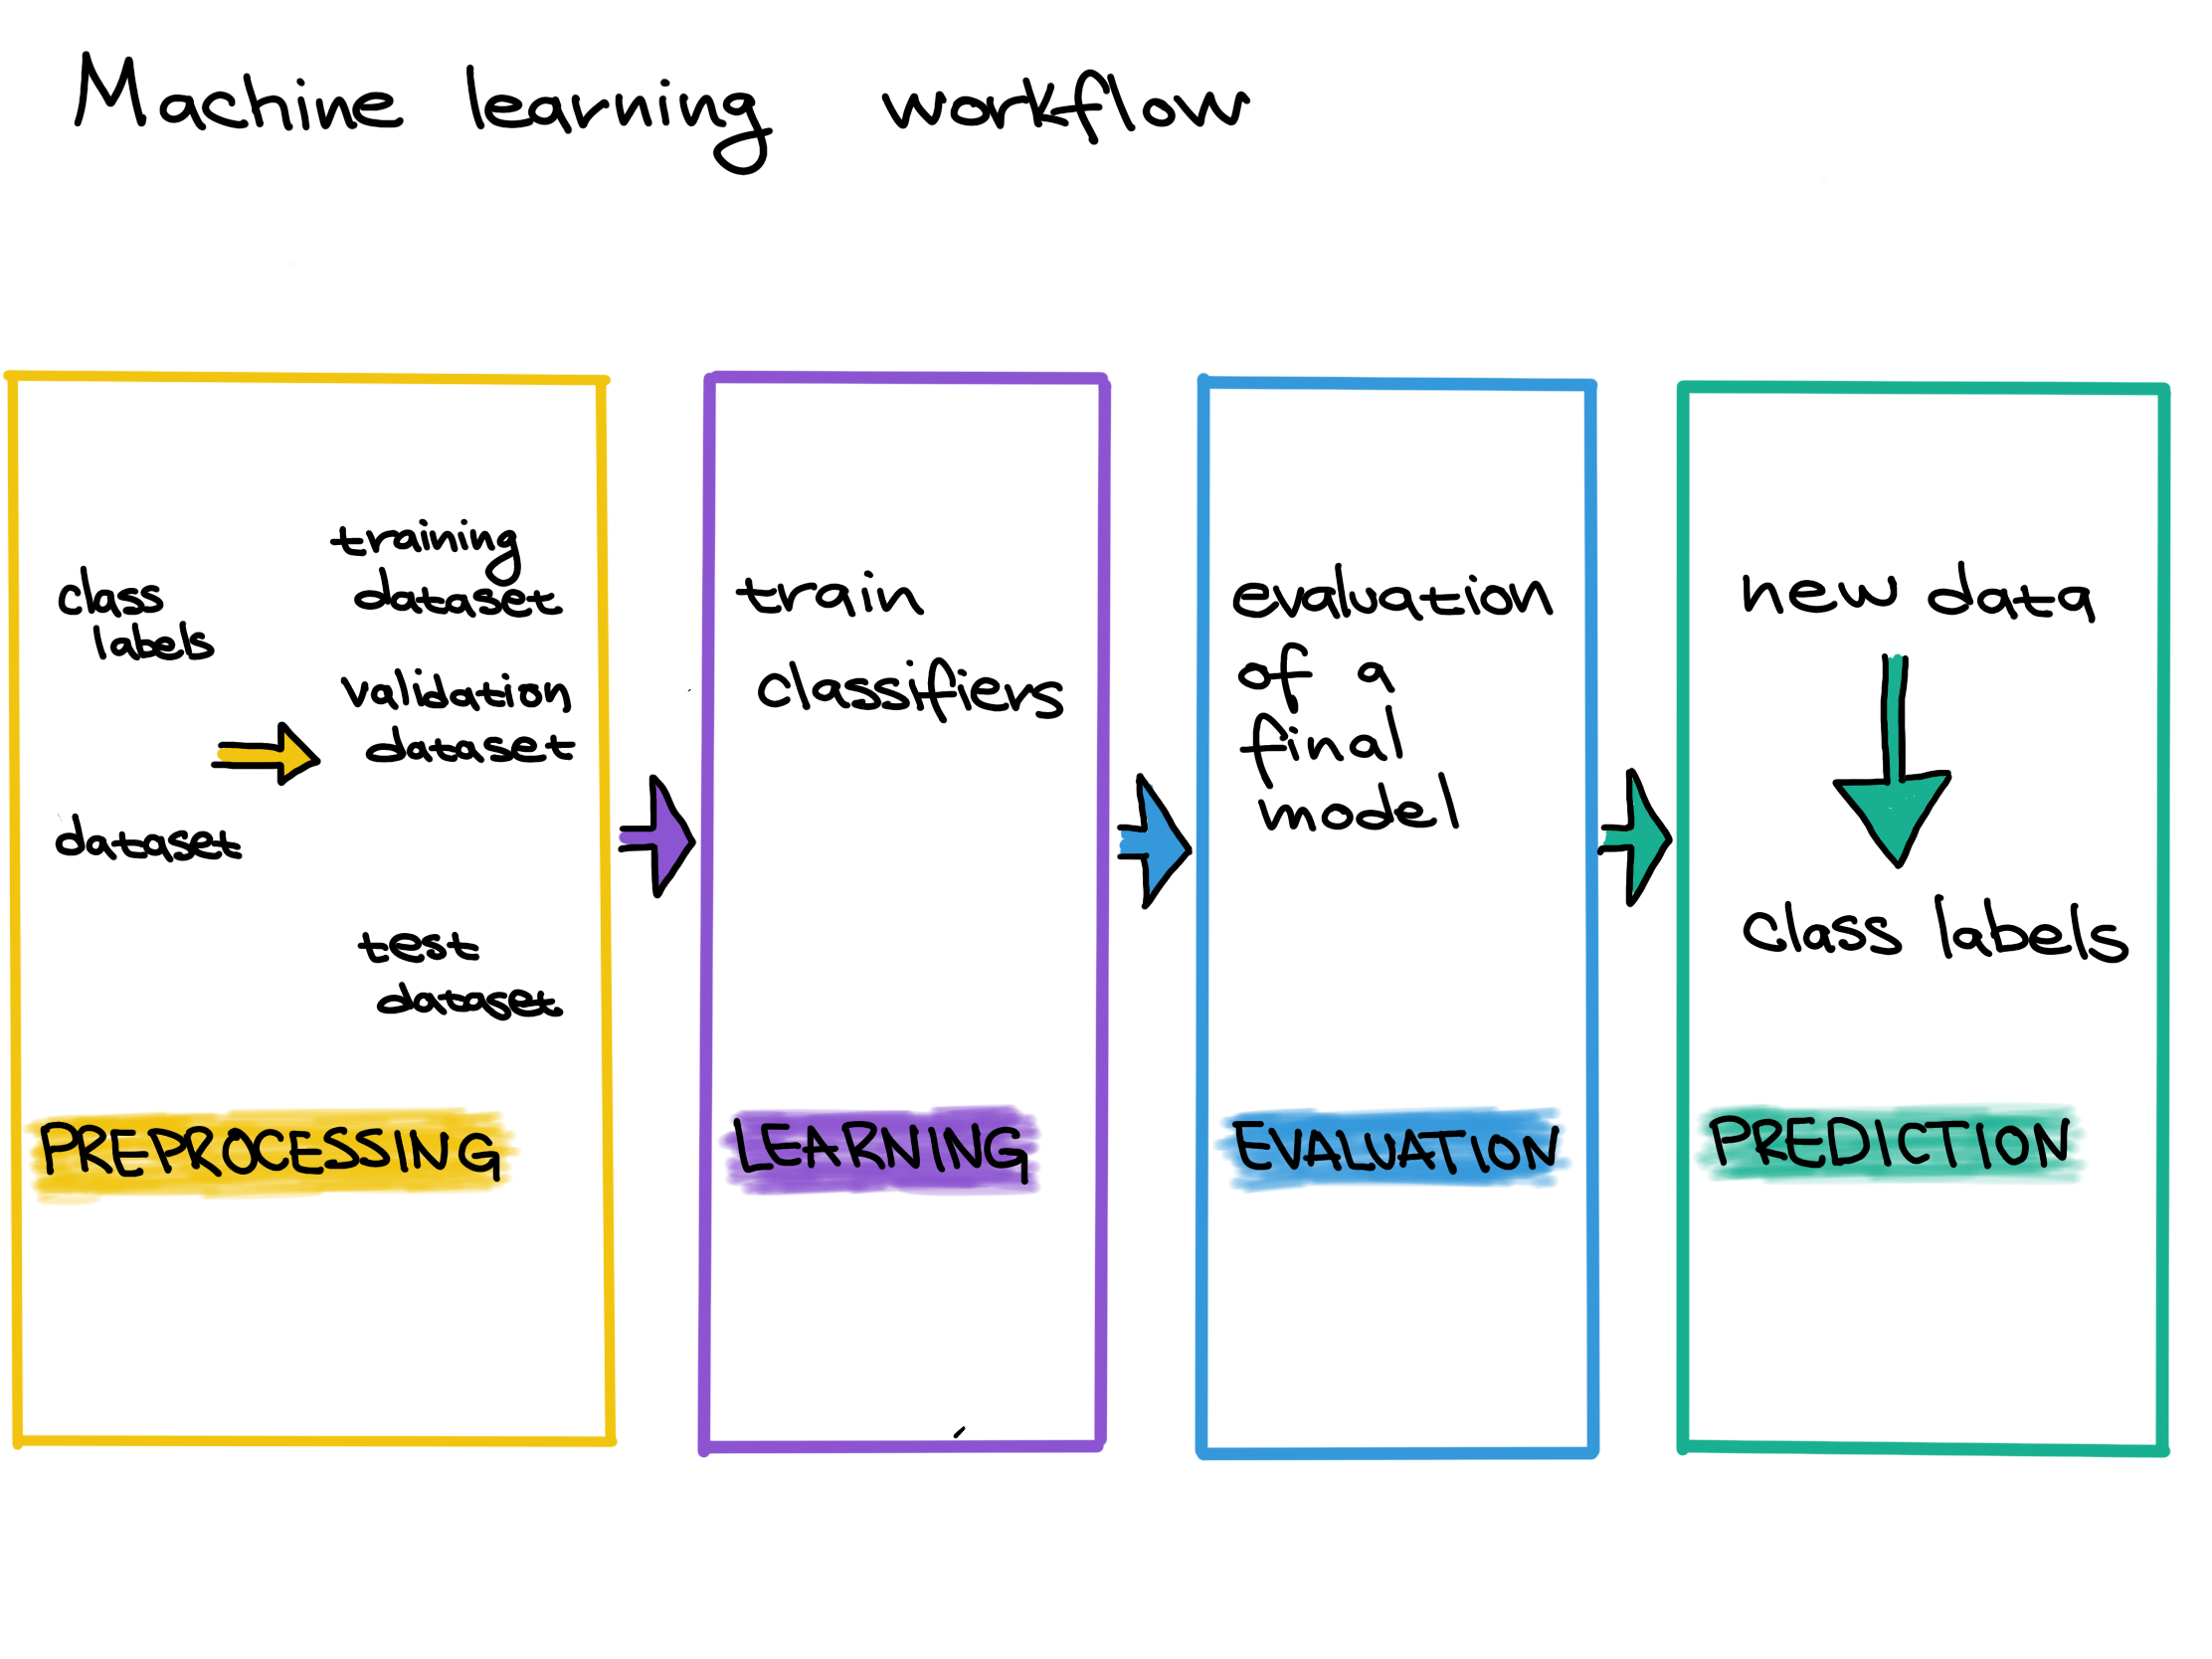 Supervised Machine Learning Workflow